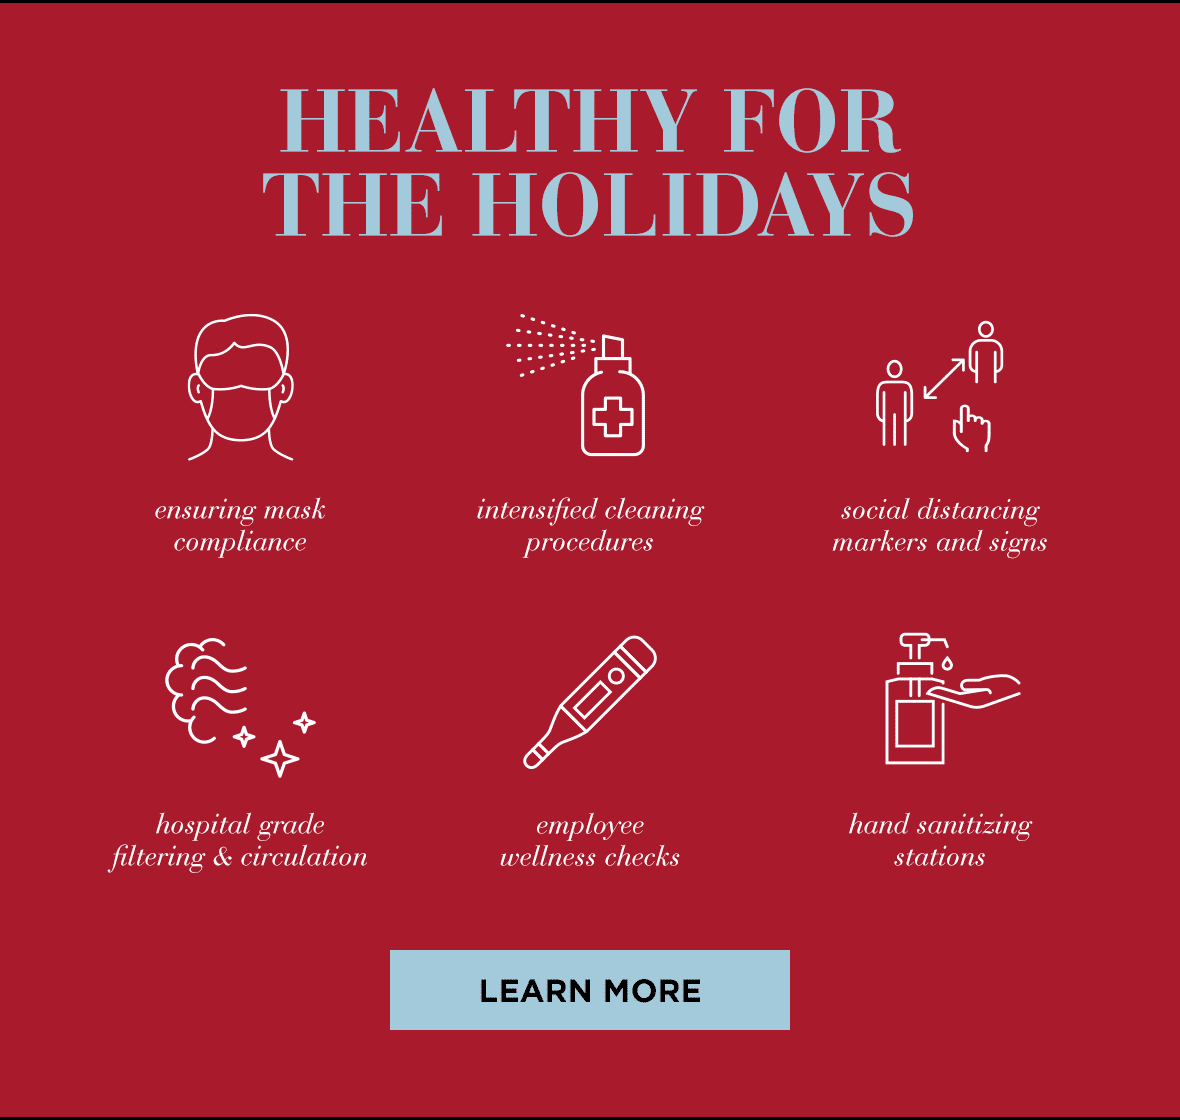 Healthy for the holidays. Ensuring mask compliance. Intensified cleaning procedures. Social distancing markers and signs. Hospital grade filtering & circulation. Employee wellness checks. Hand sanitizing stations. Learn more.